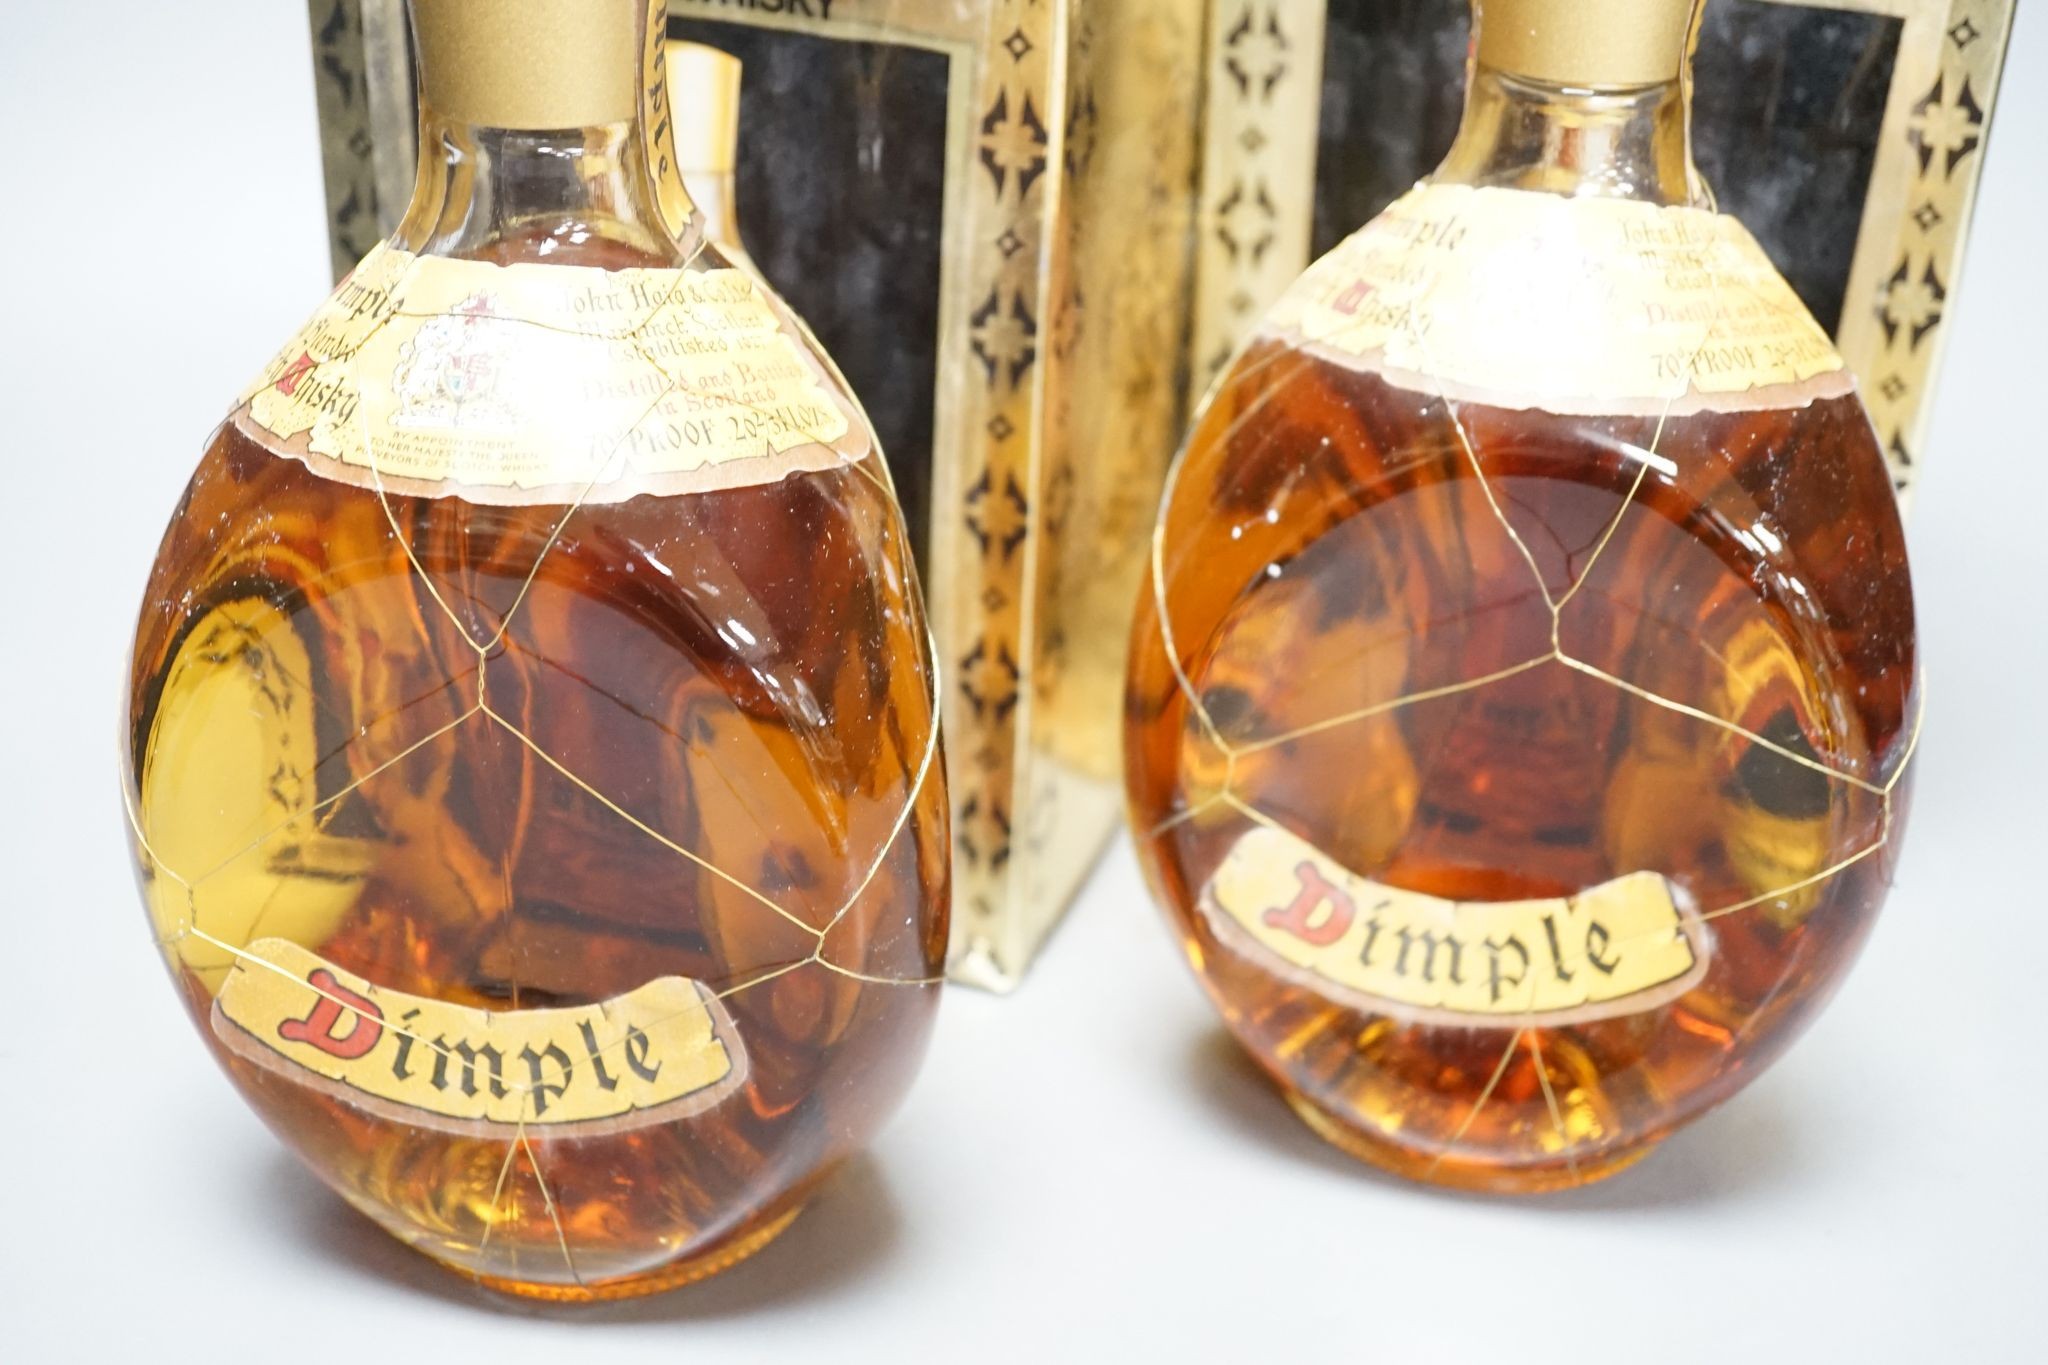 Two boxed bottles of Dimple Scotch whisky.